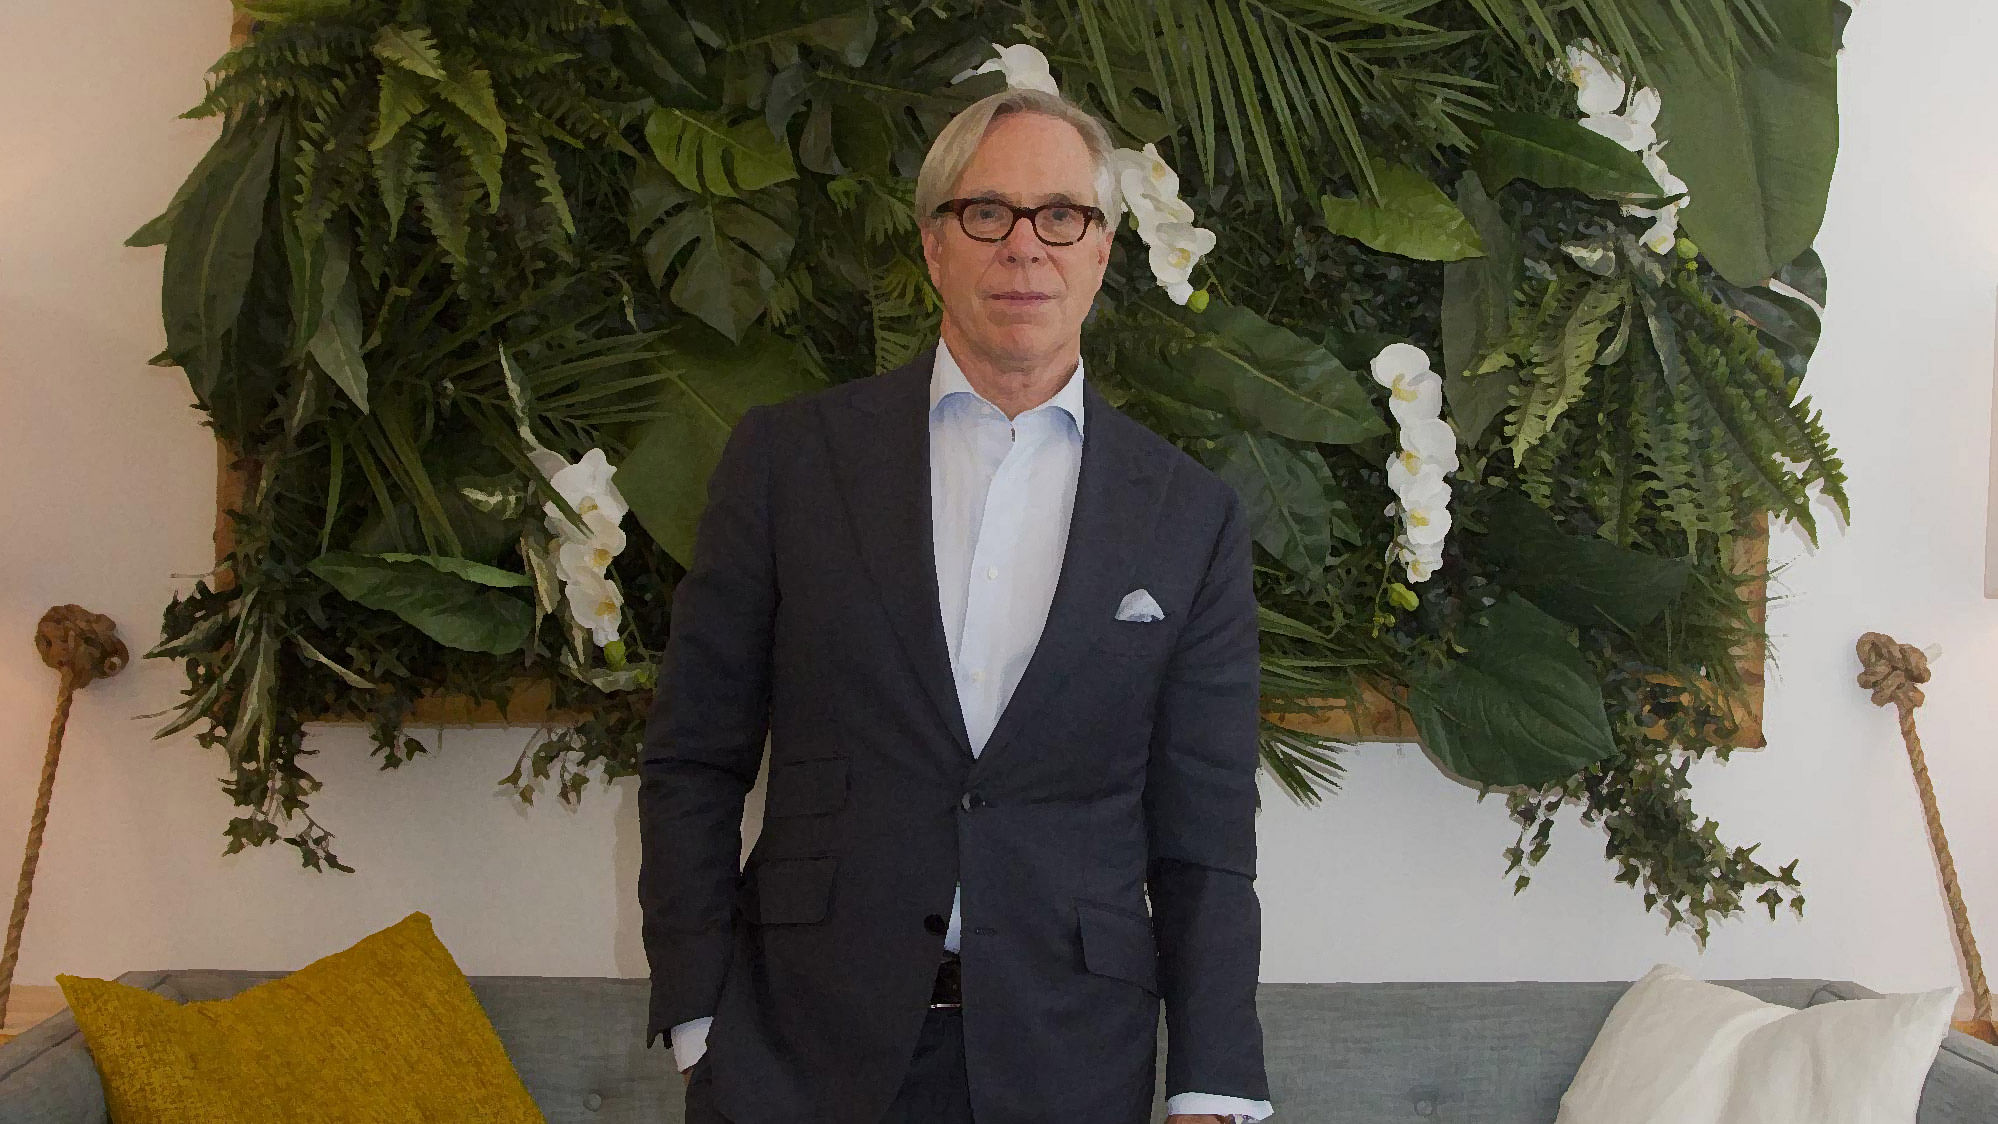 Tommy Hilfiger’s dyslexia motivated him to build his brand. (Photo: IANS)